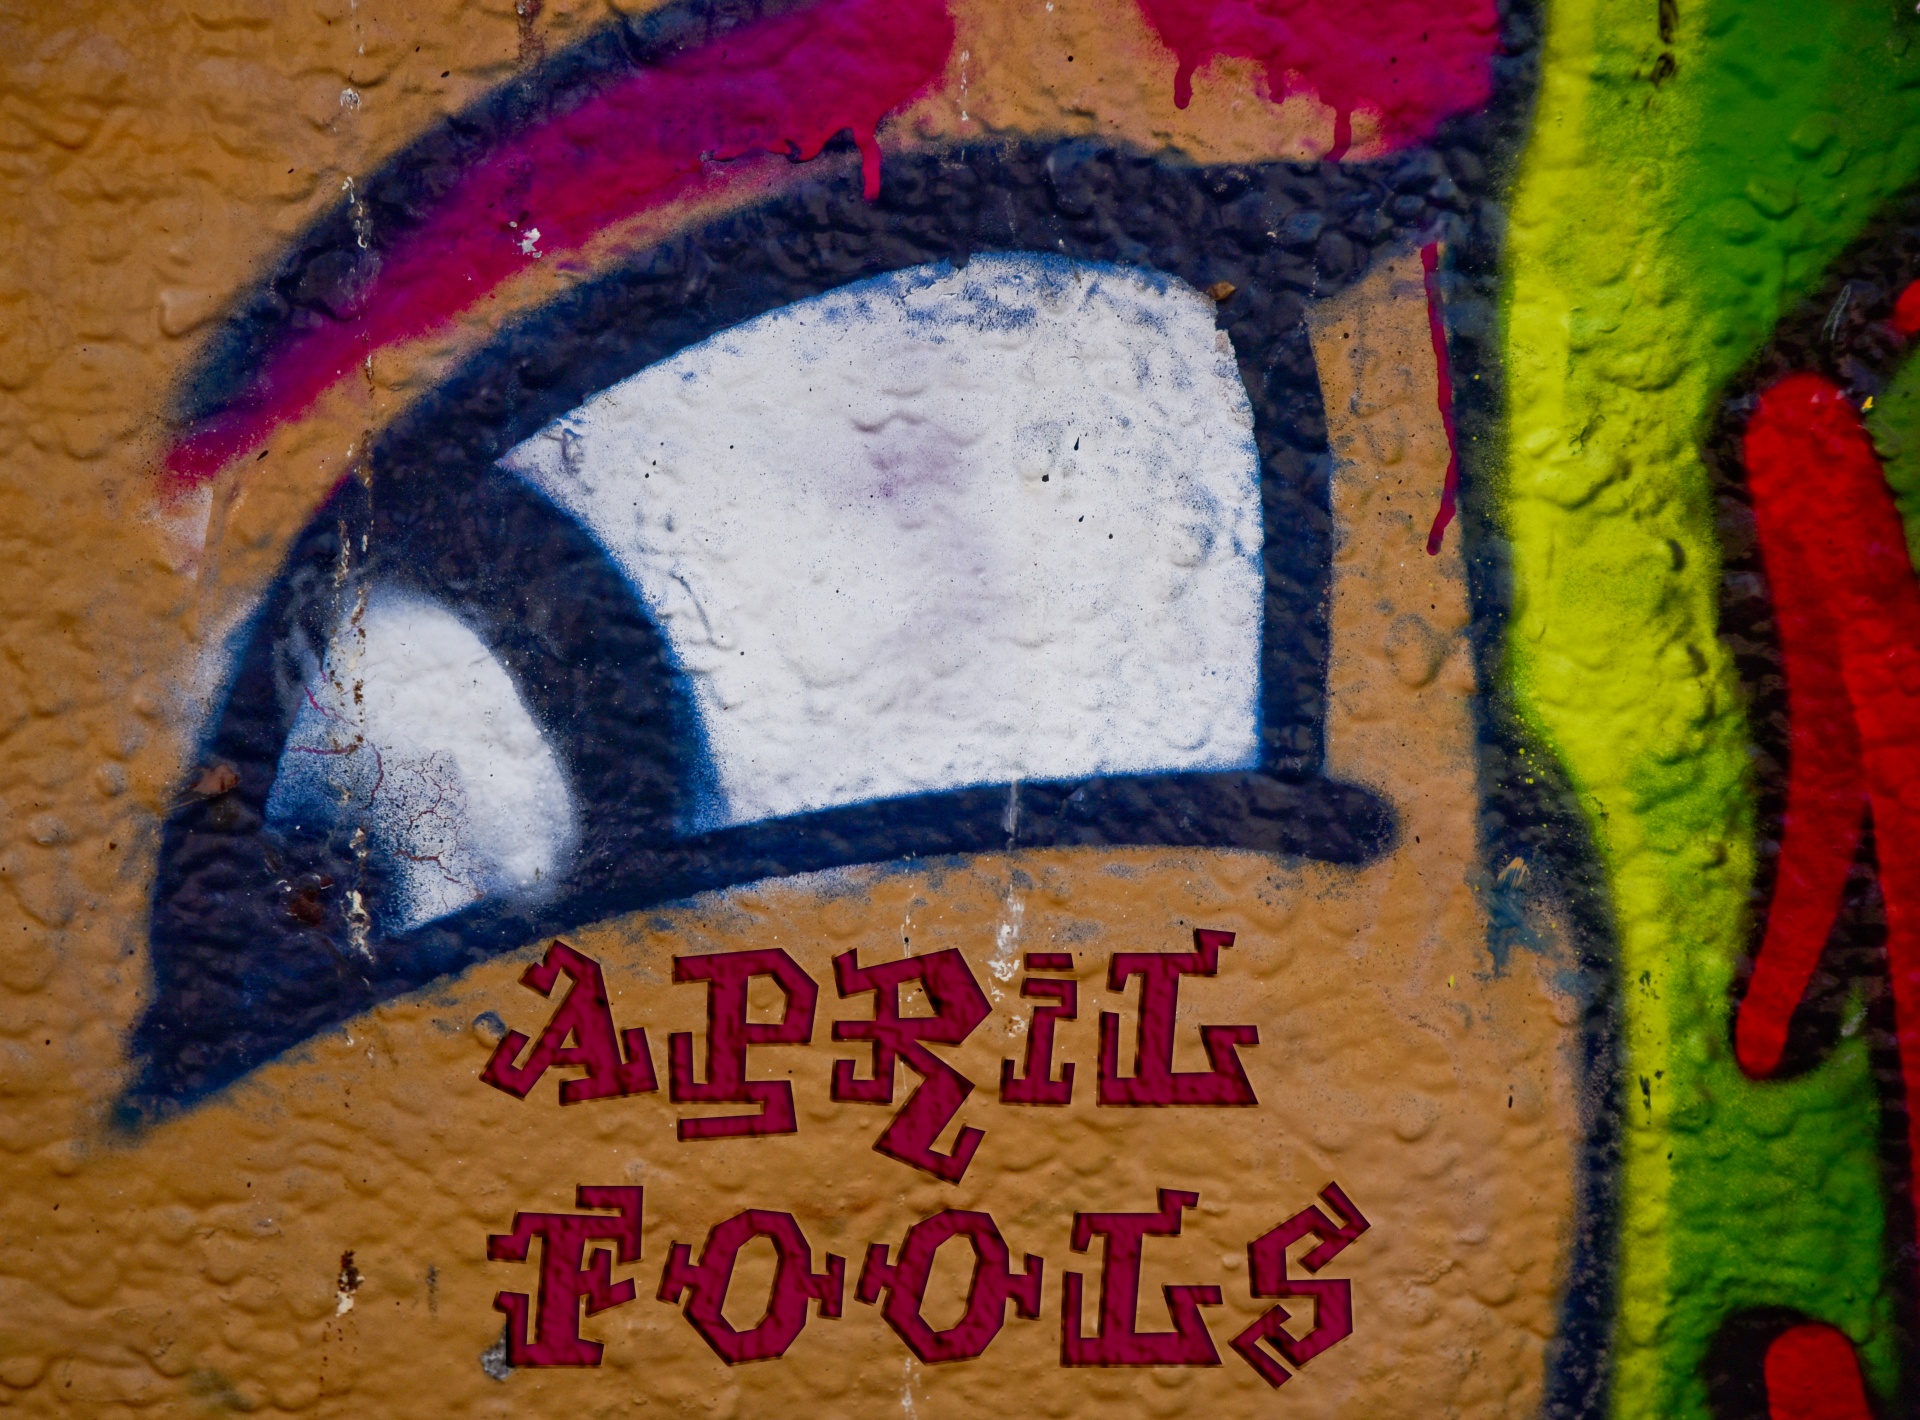 Graffiti on a Wall for April Fools Day with orange, green, red and black stucco